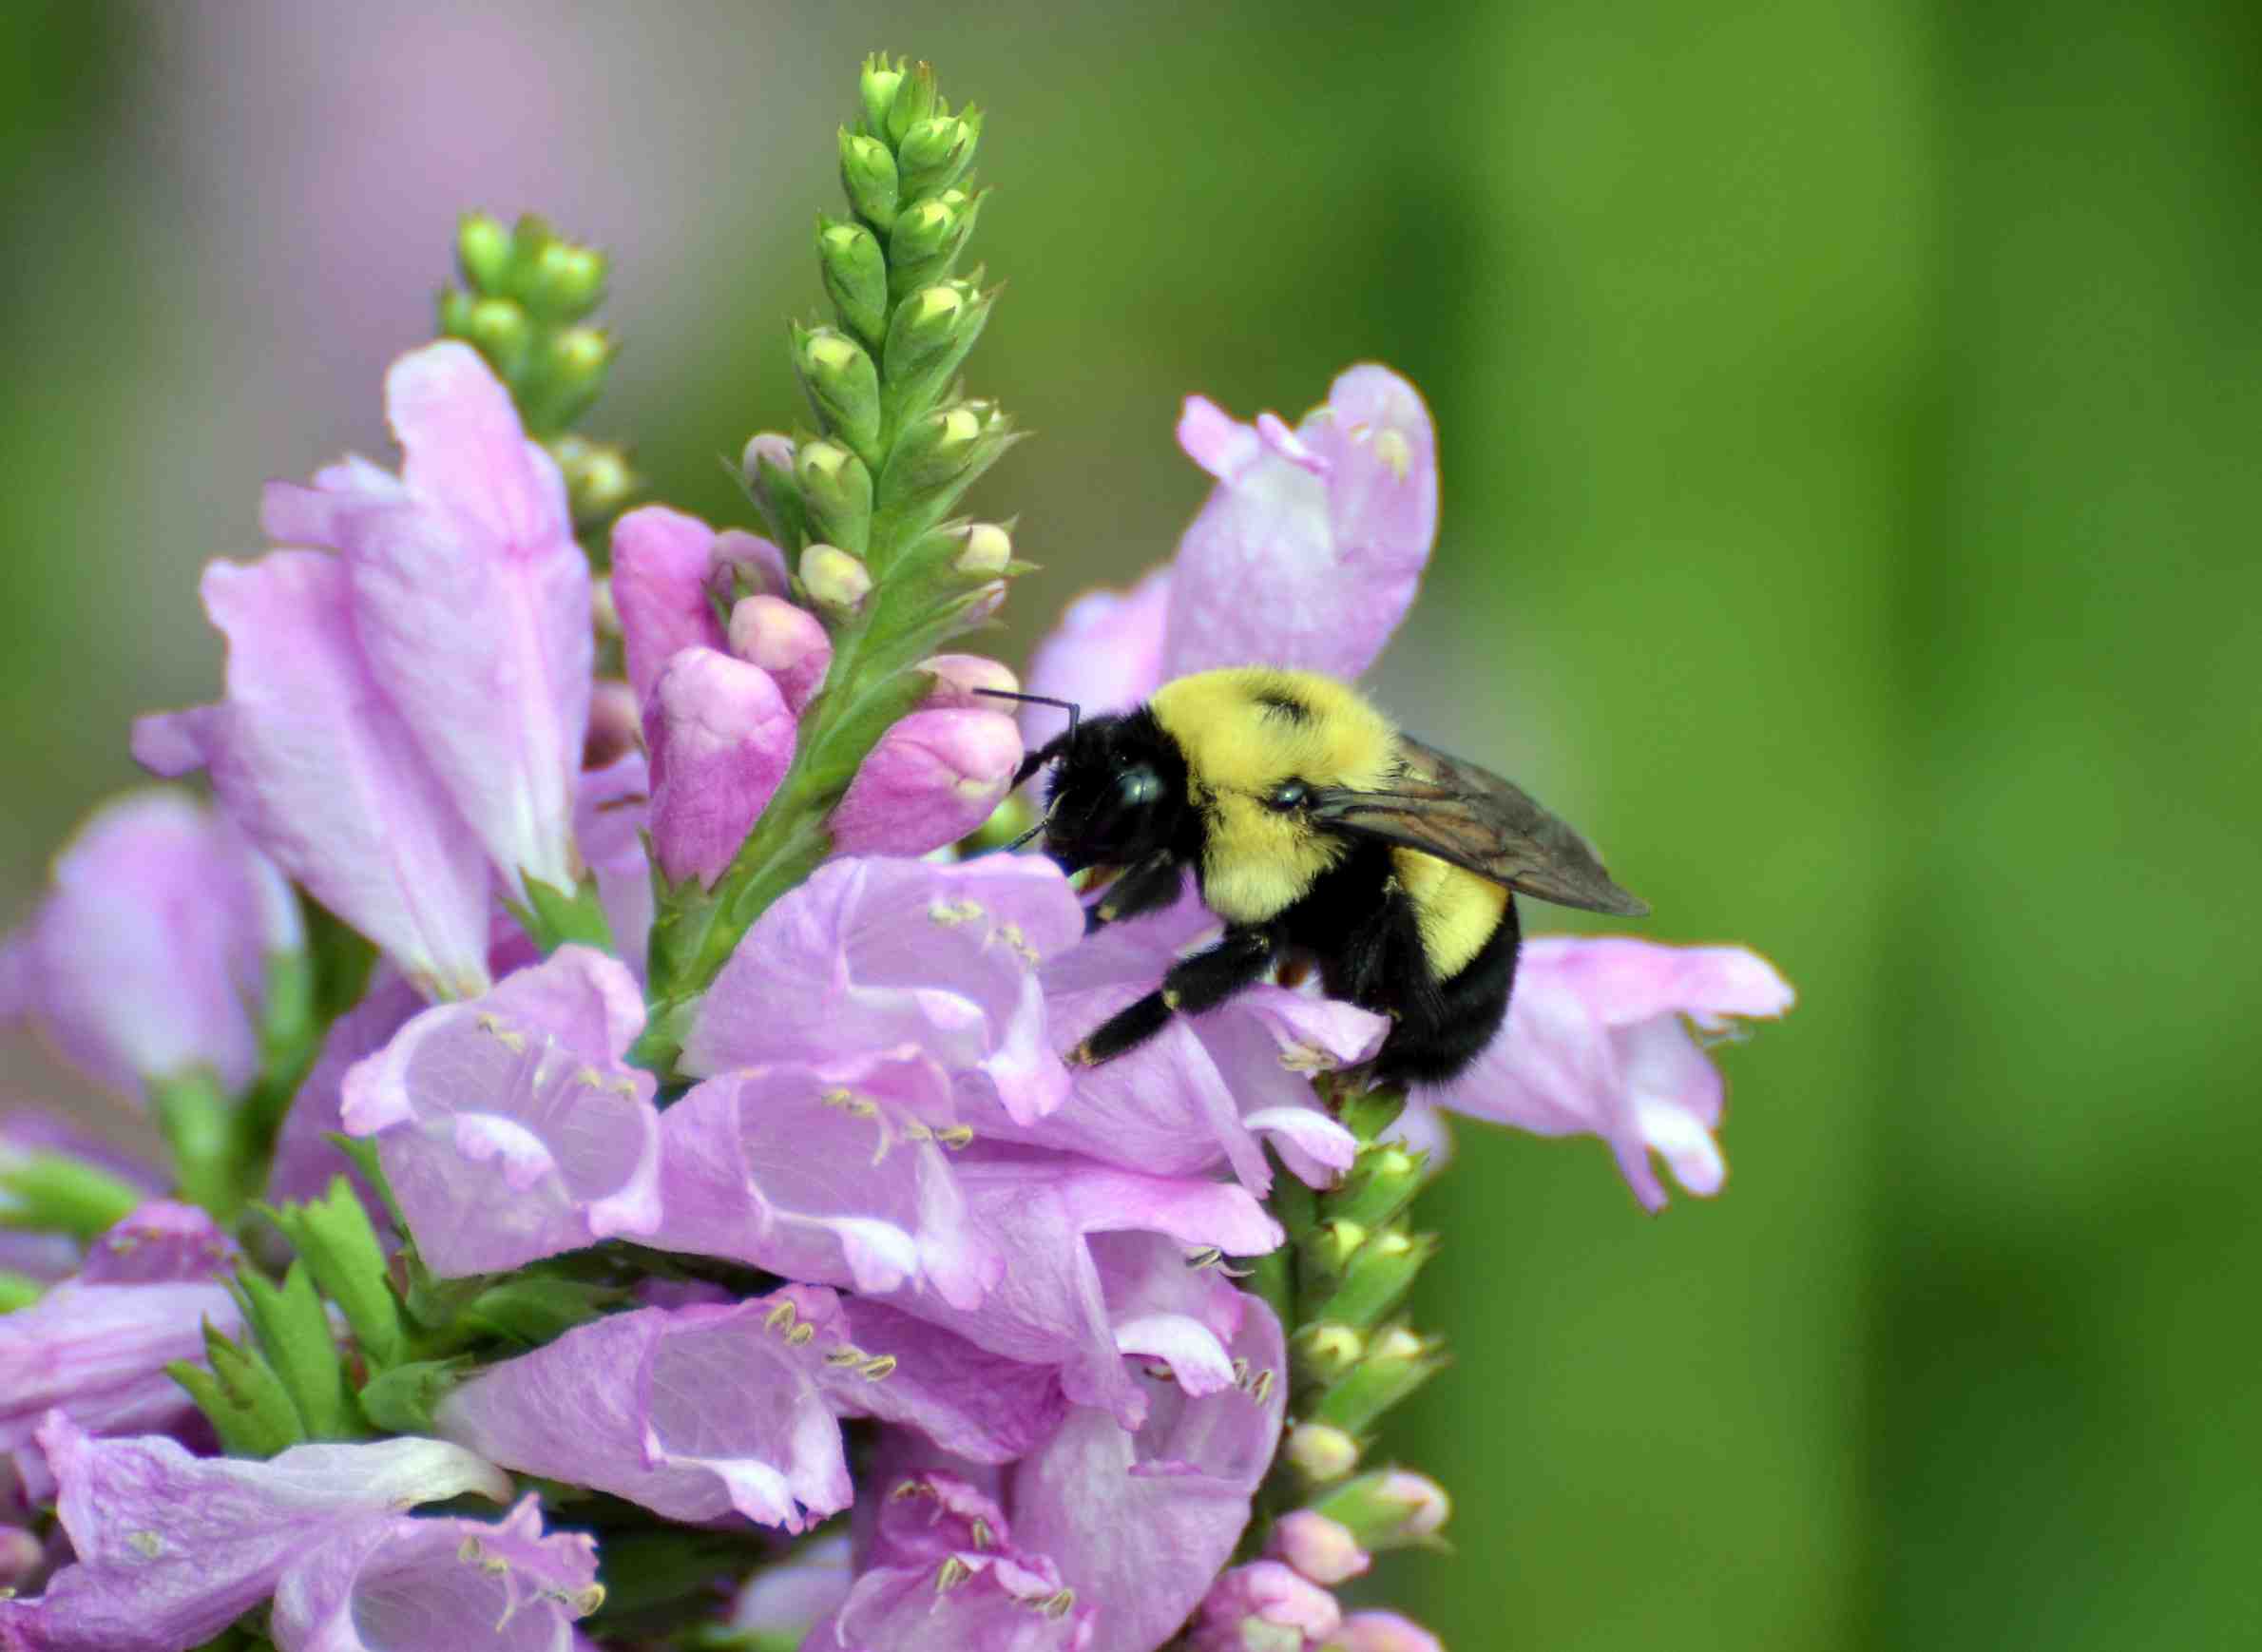 As honey bees become more popular, Wisconsin’s native bees still struggle